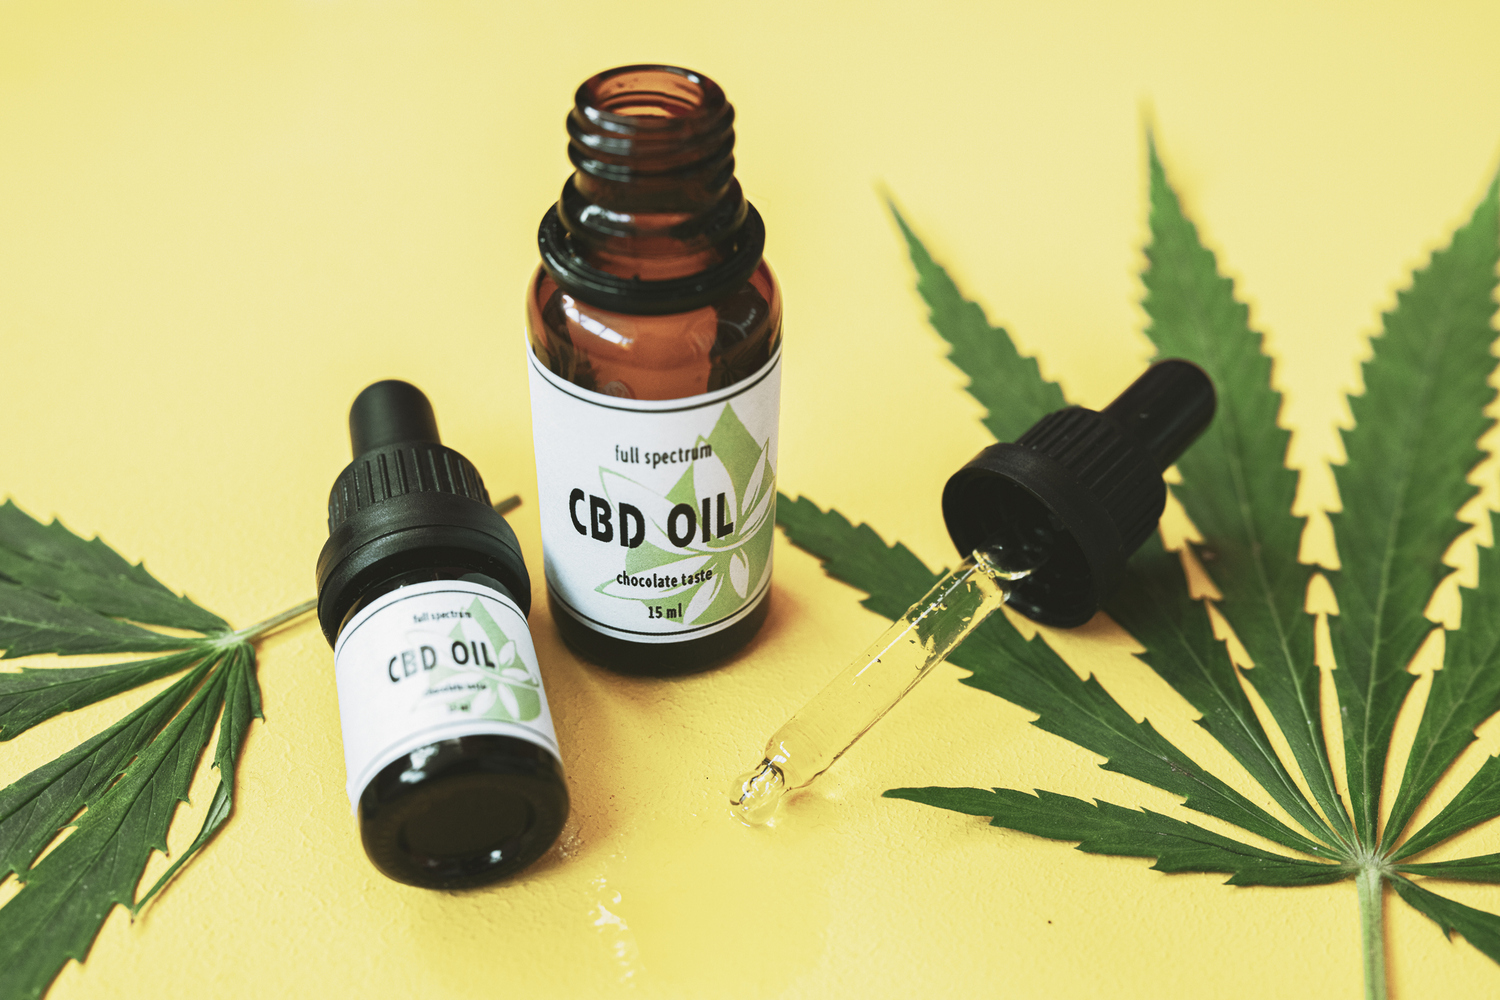 Study reveals oil type impacts CBD and THC bioavailability